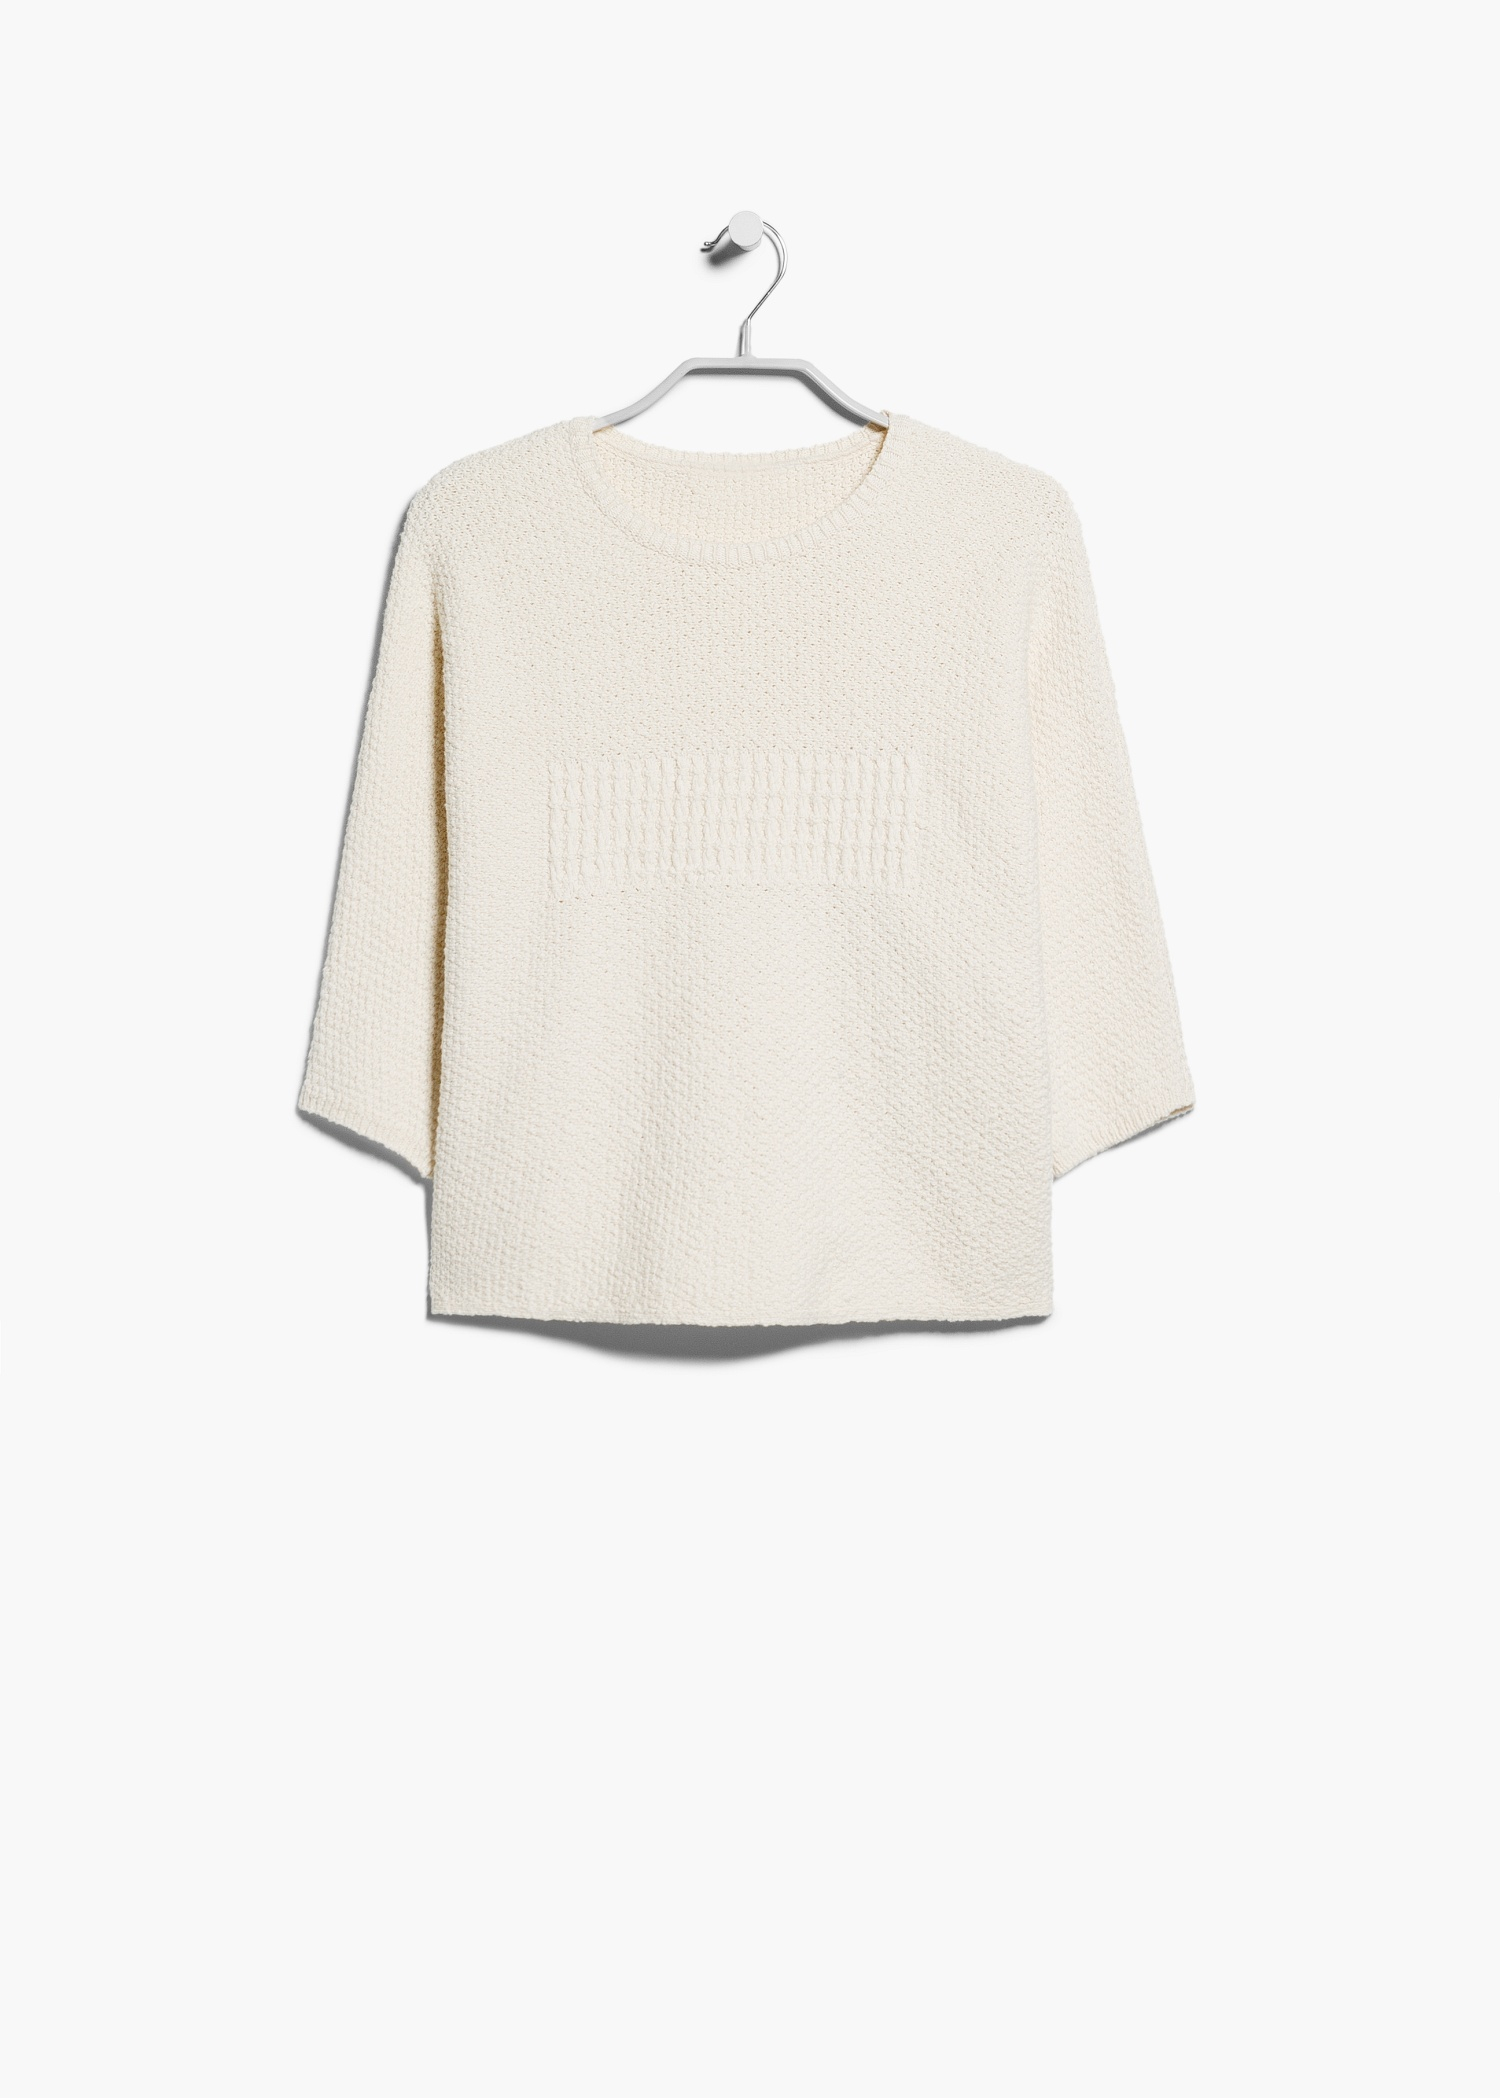 Mango Premium - Cropped Cotton Sweater in Natural | Lyst